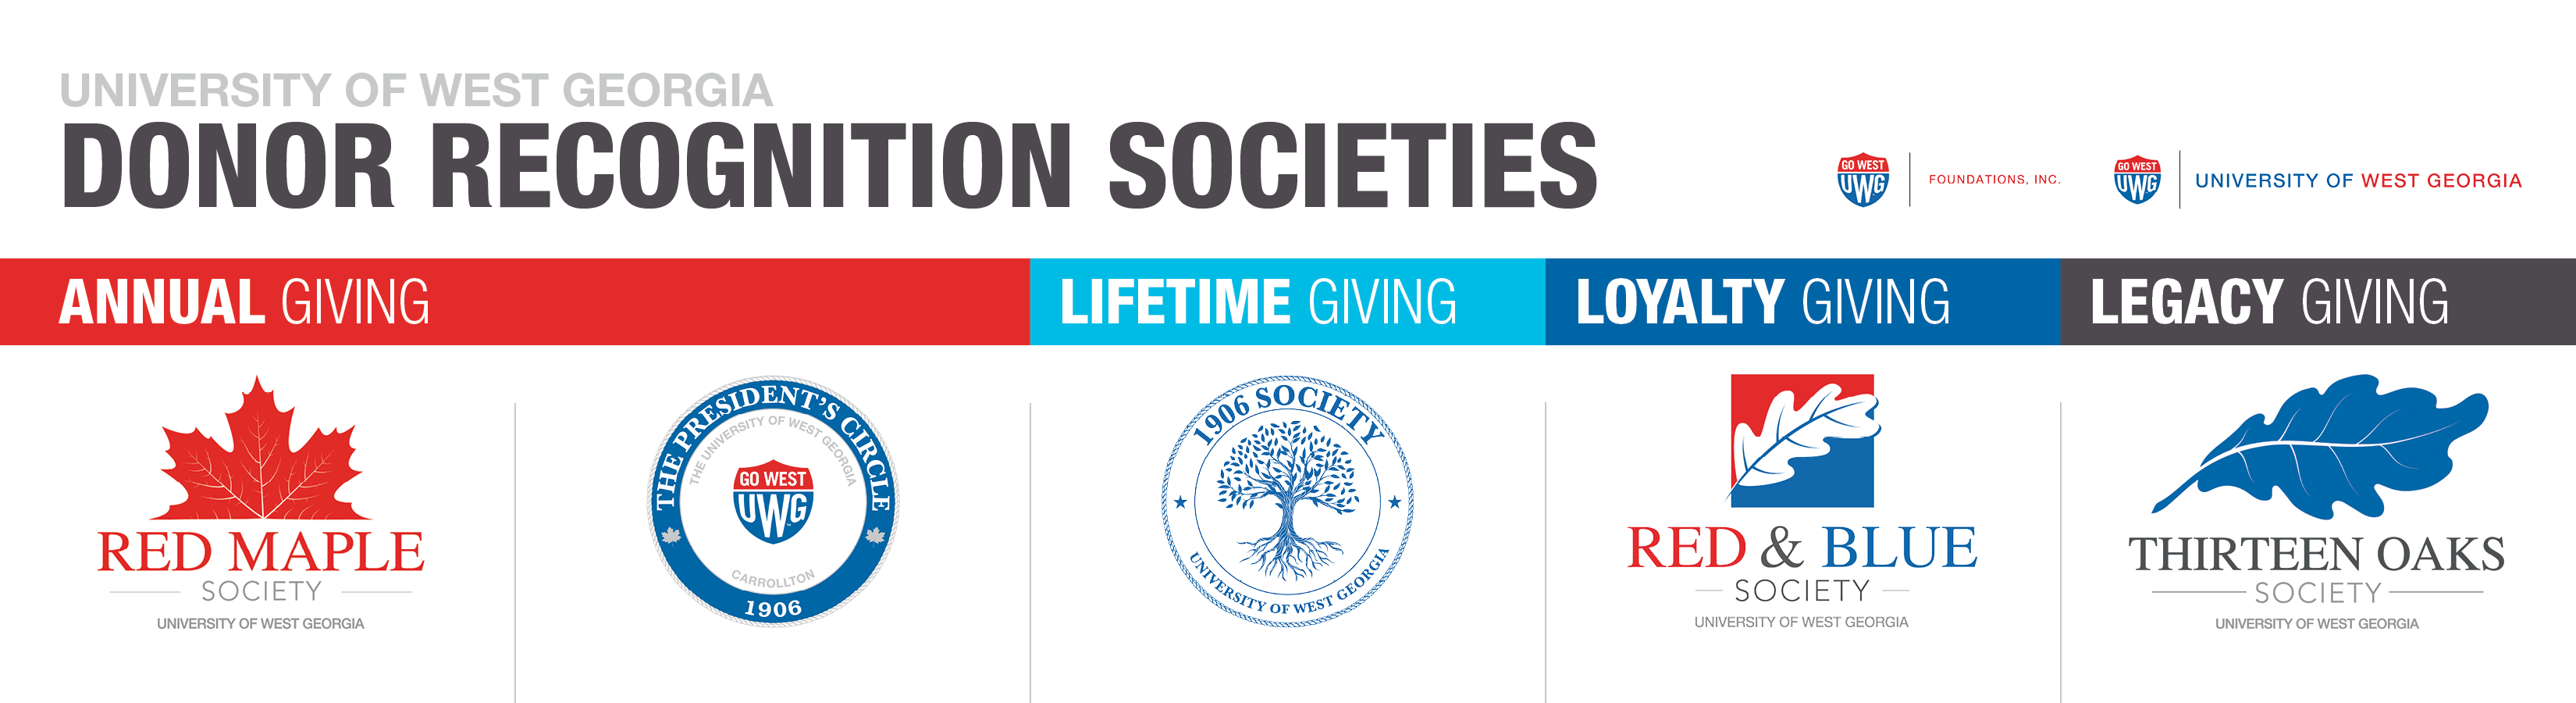 Donor recognition society logos.